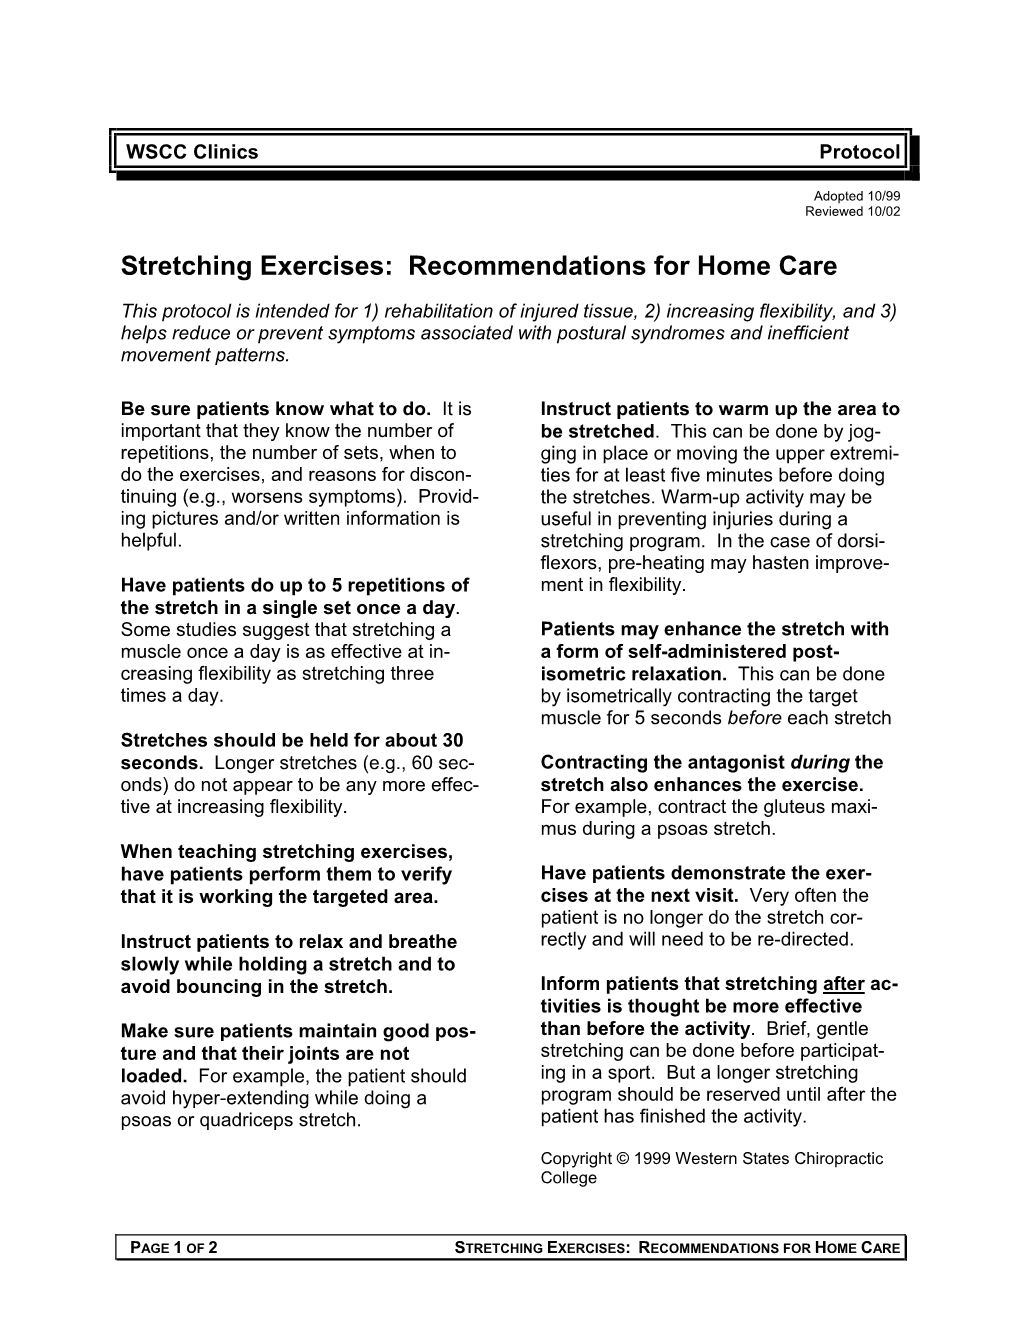 Stretching Exercises: Recommendations for Home Care